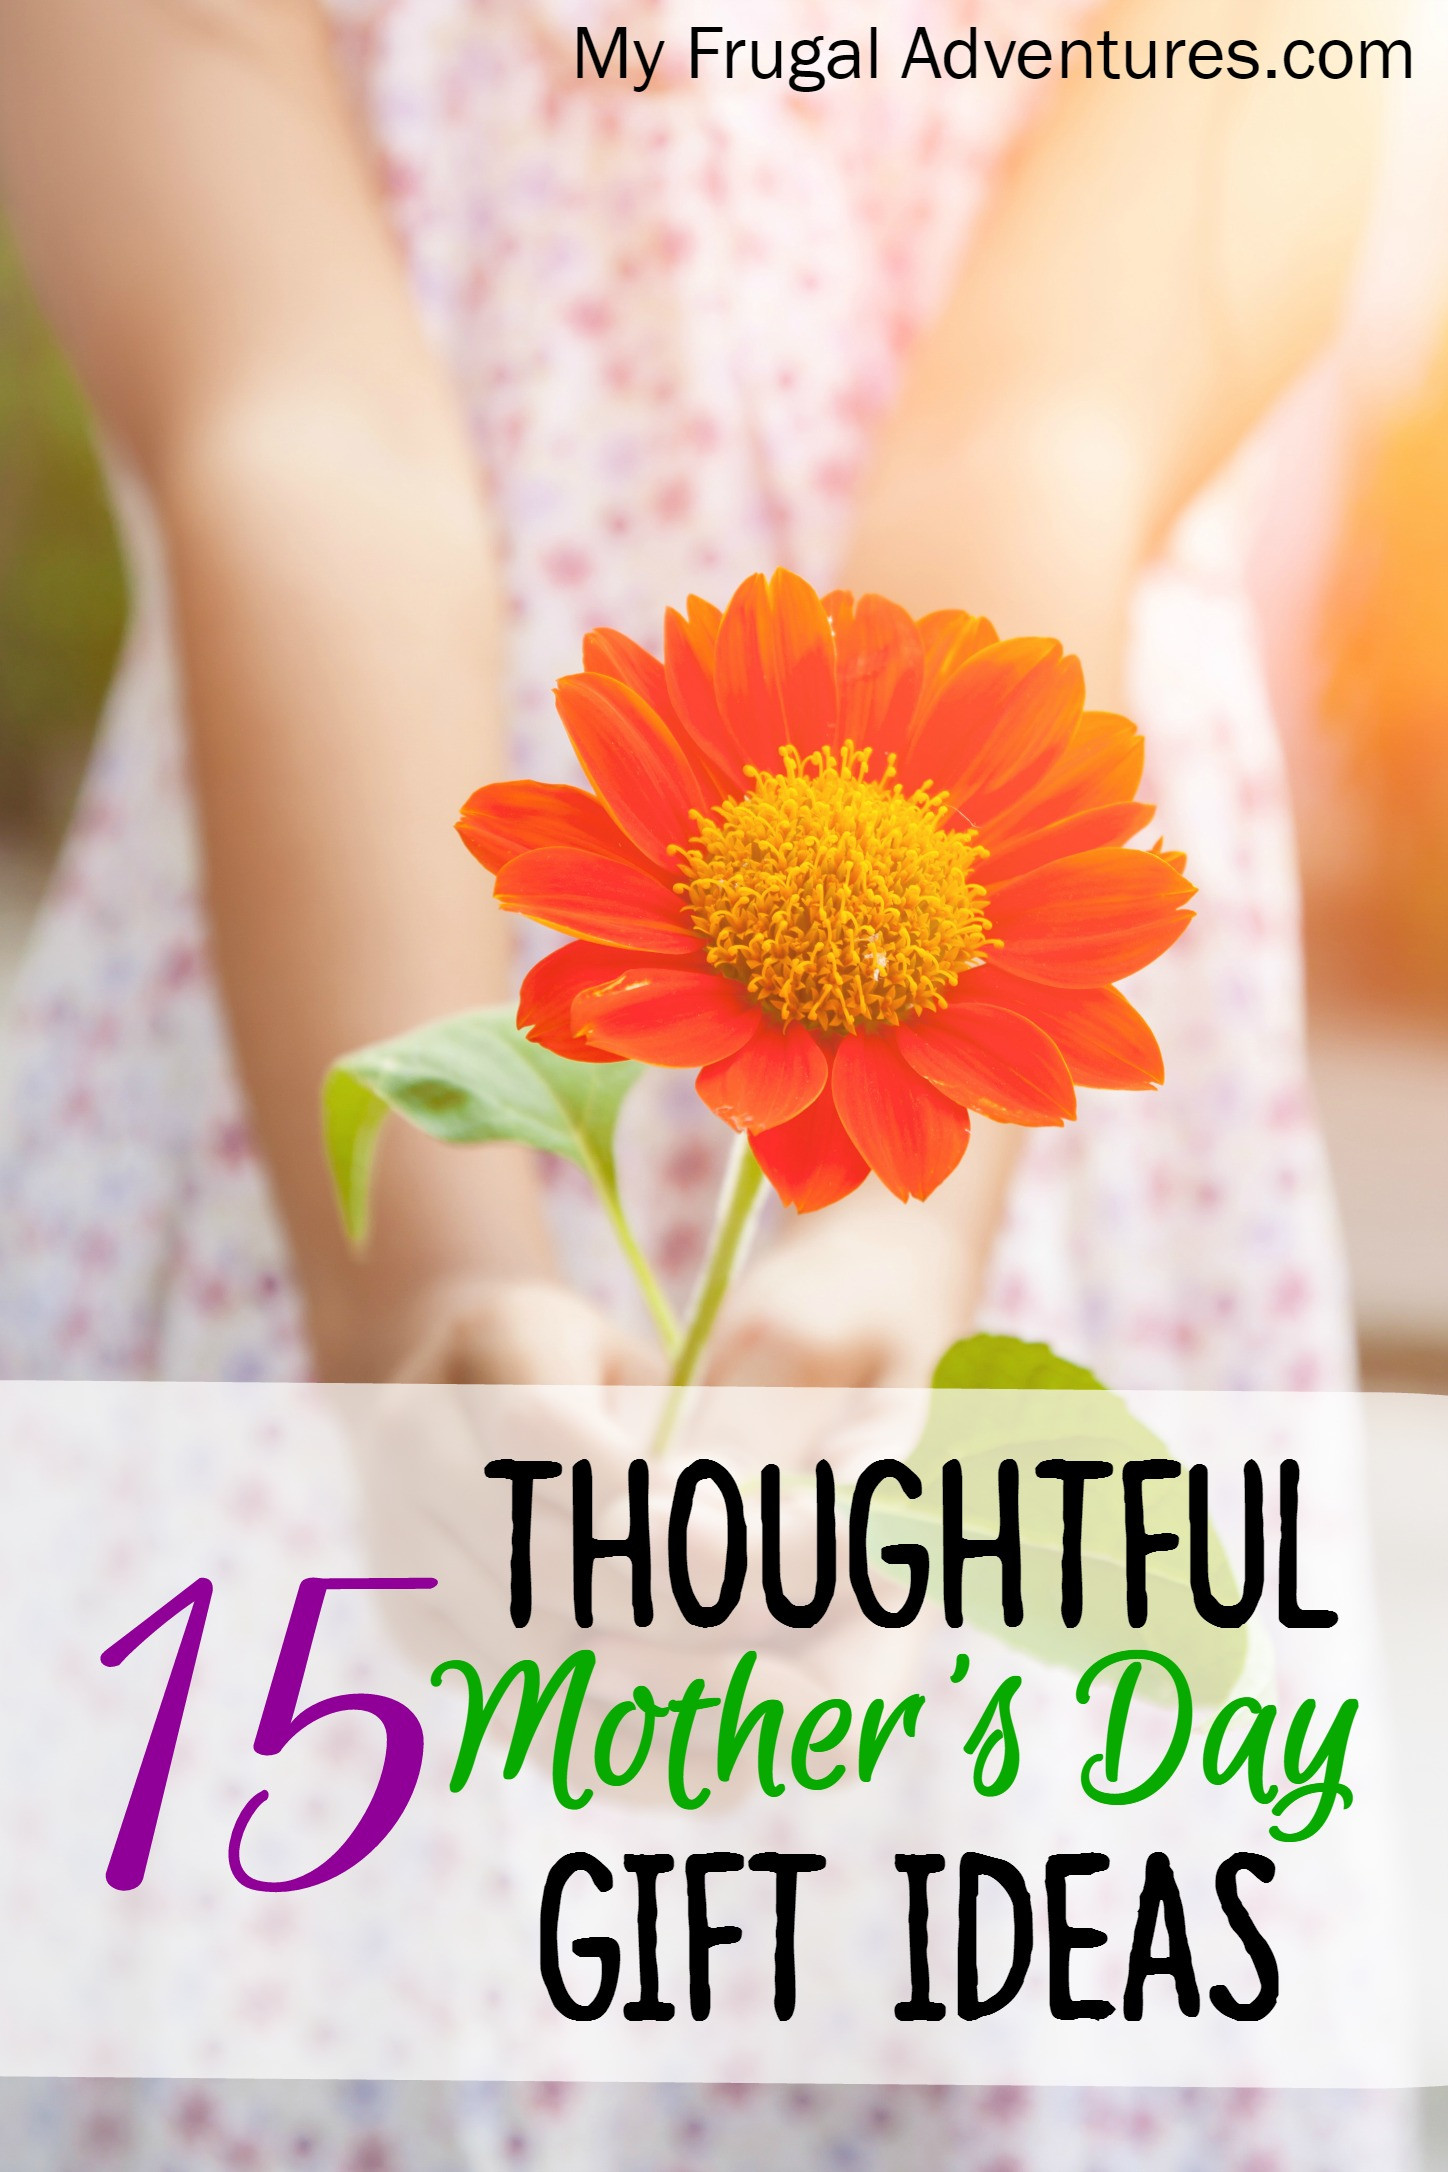 Thoughtful Mother's Day Gifts
 15 Thoughtful Mother s Day Gift Ideas My Frugal Adventures